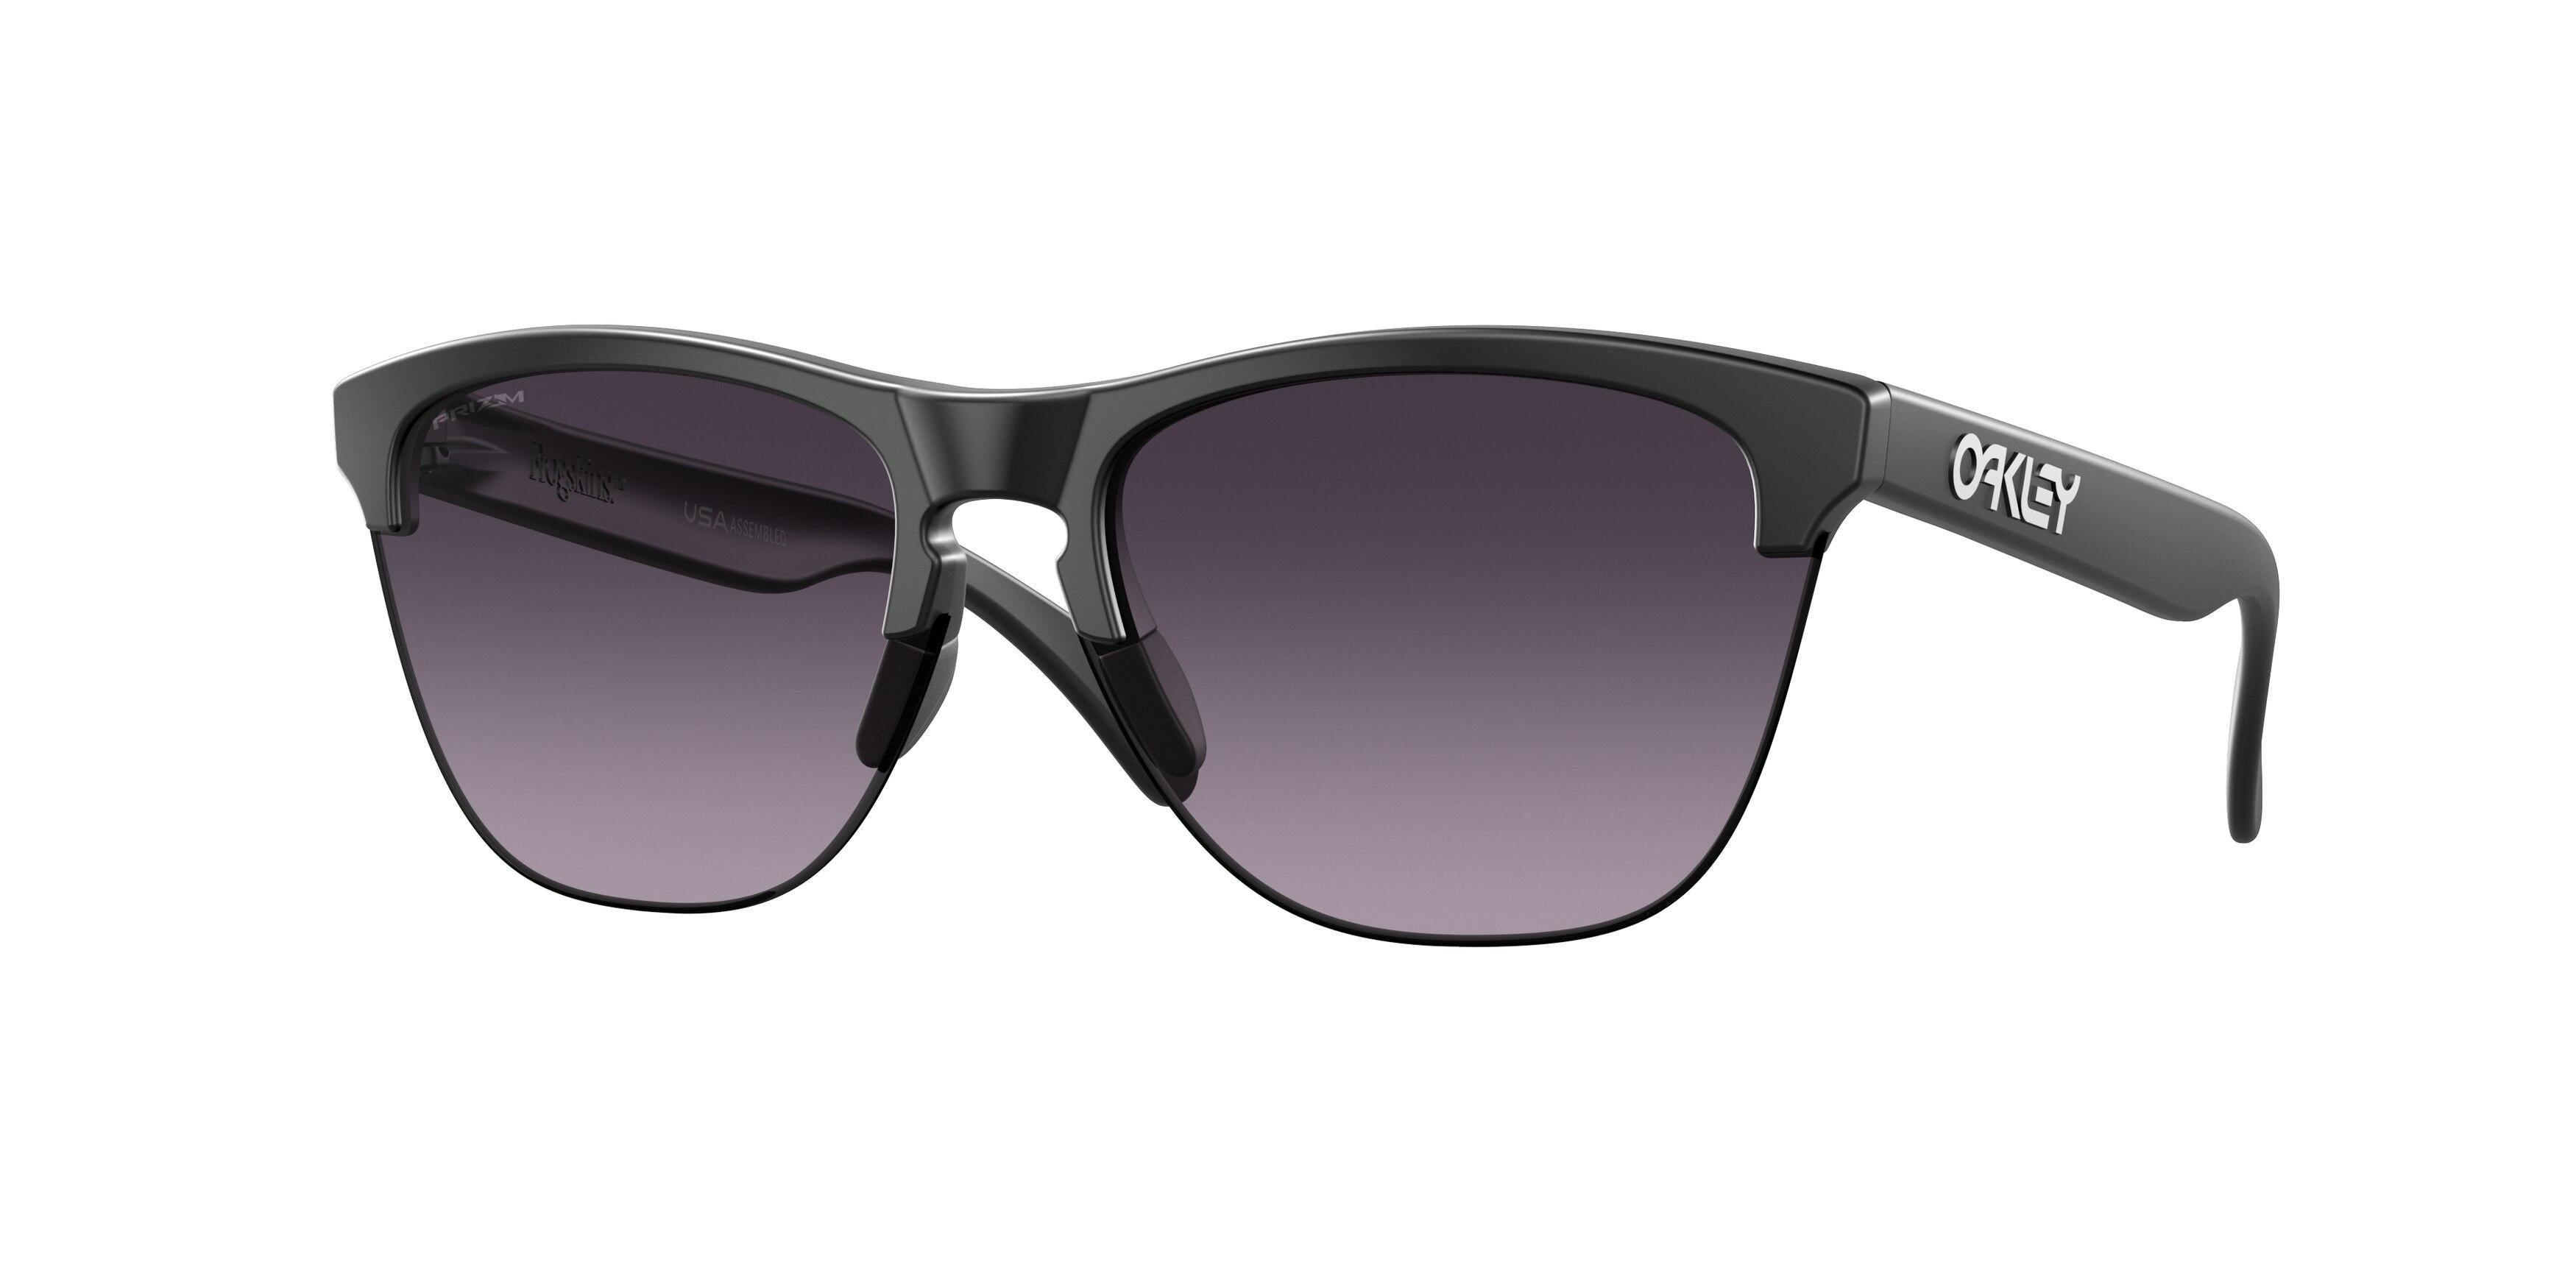 Oakley Frogskins Lite 63mm Oversized Round Sunglasses Product Image